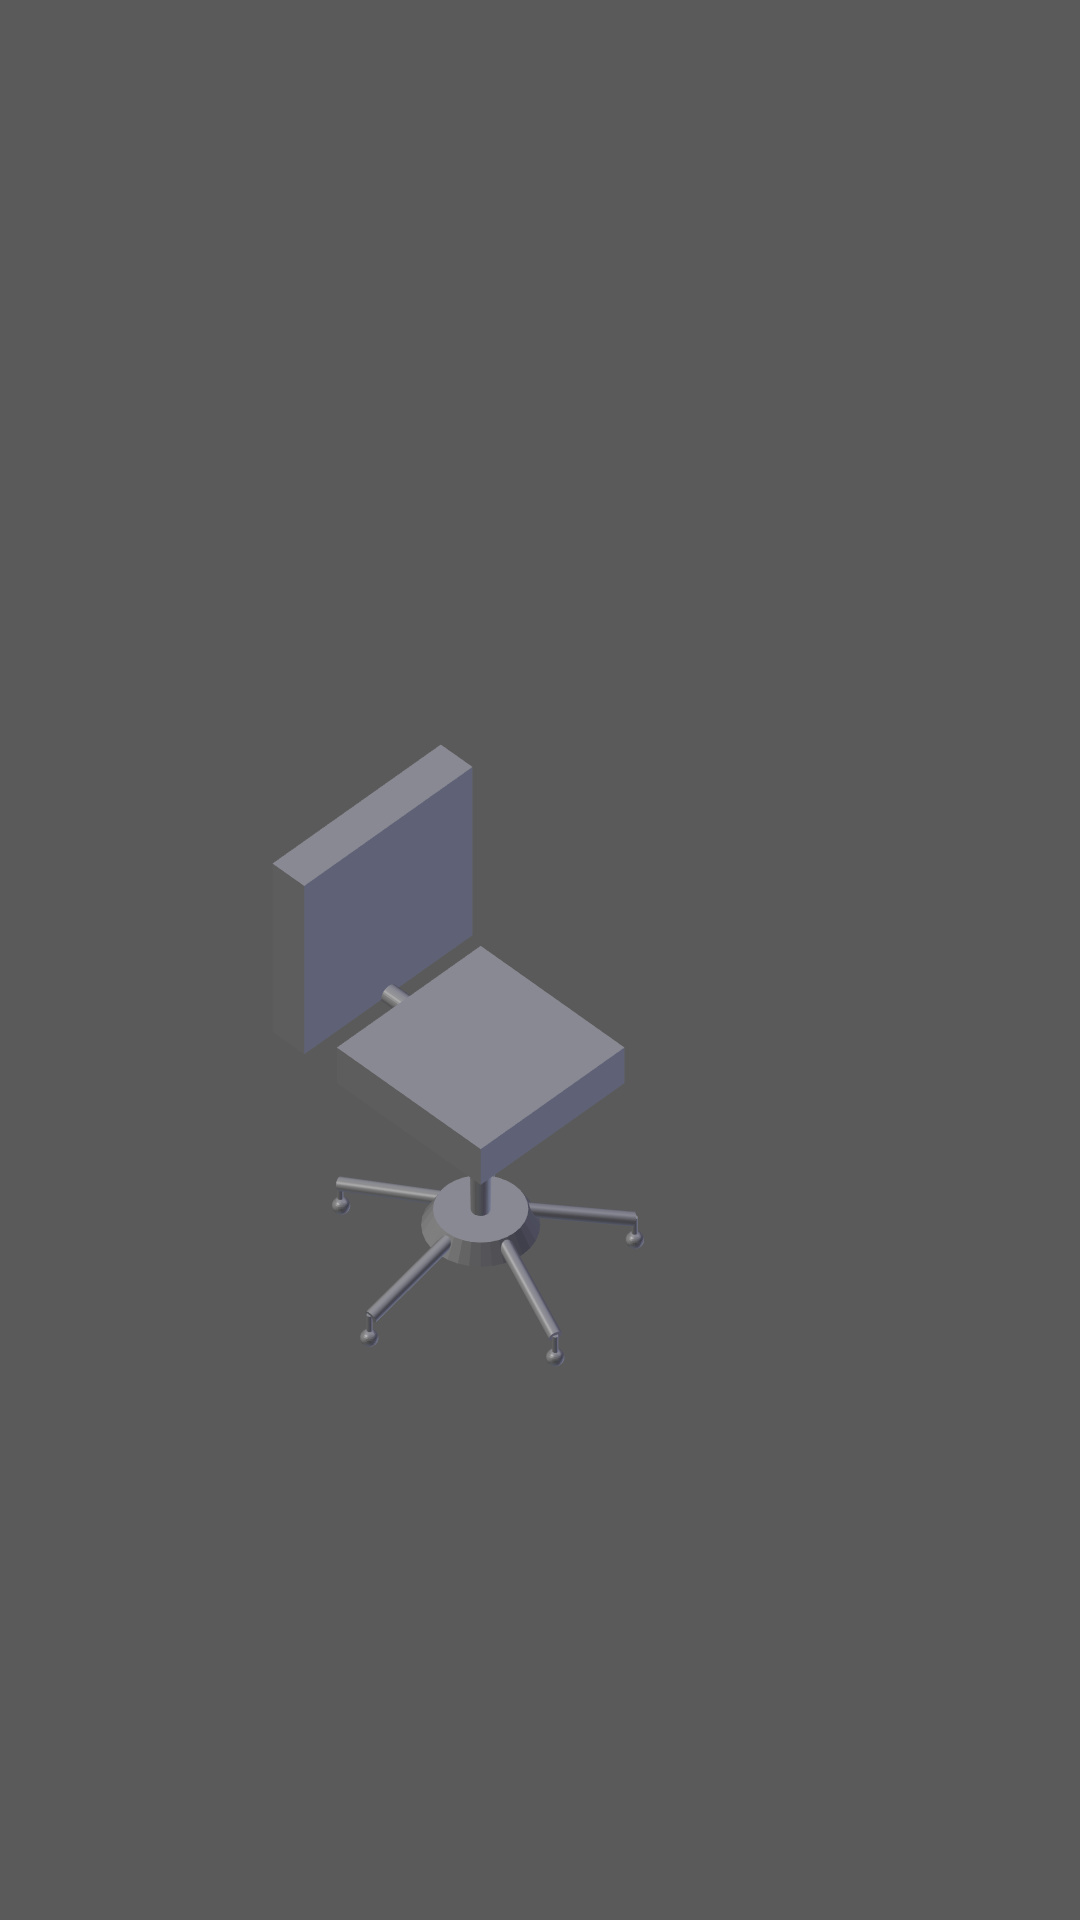 office_chair